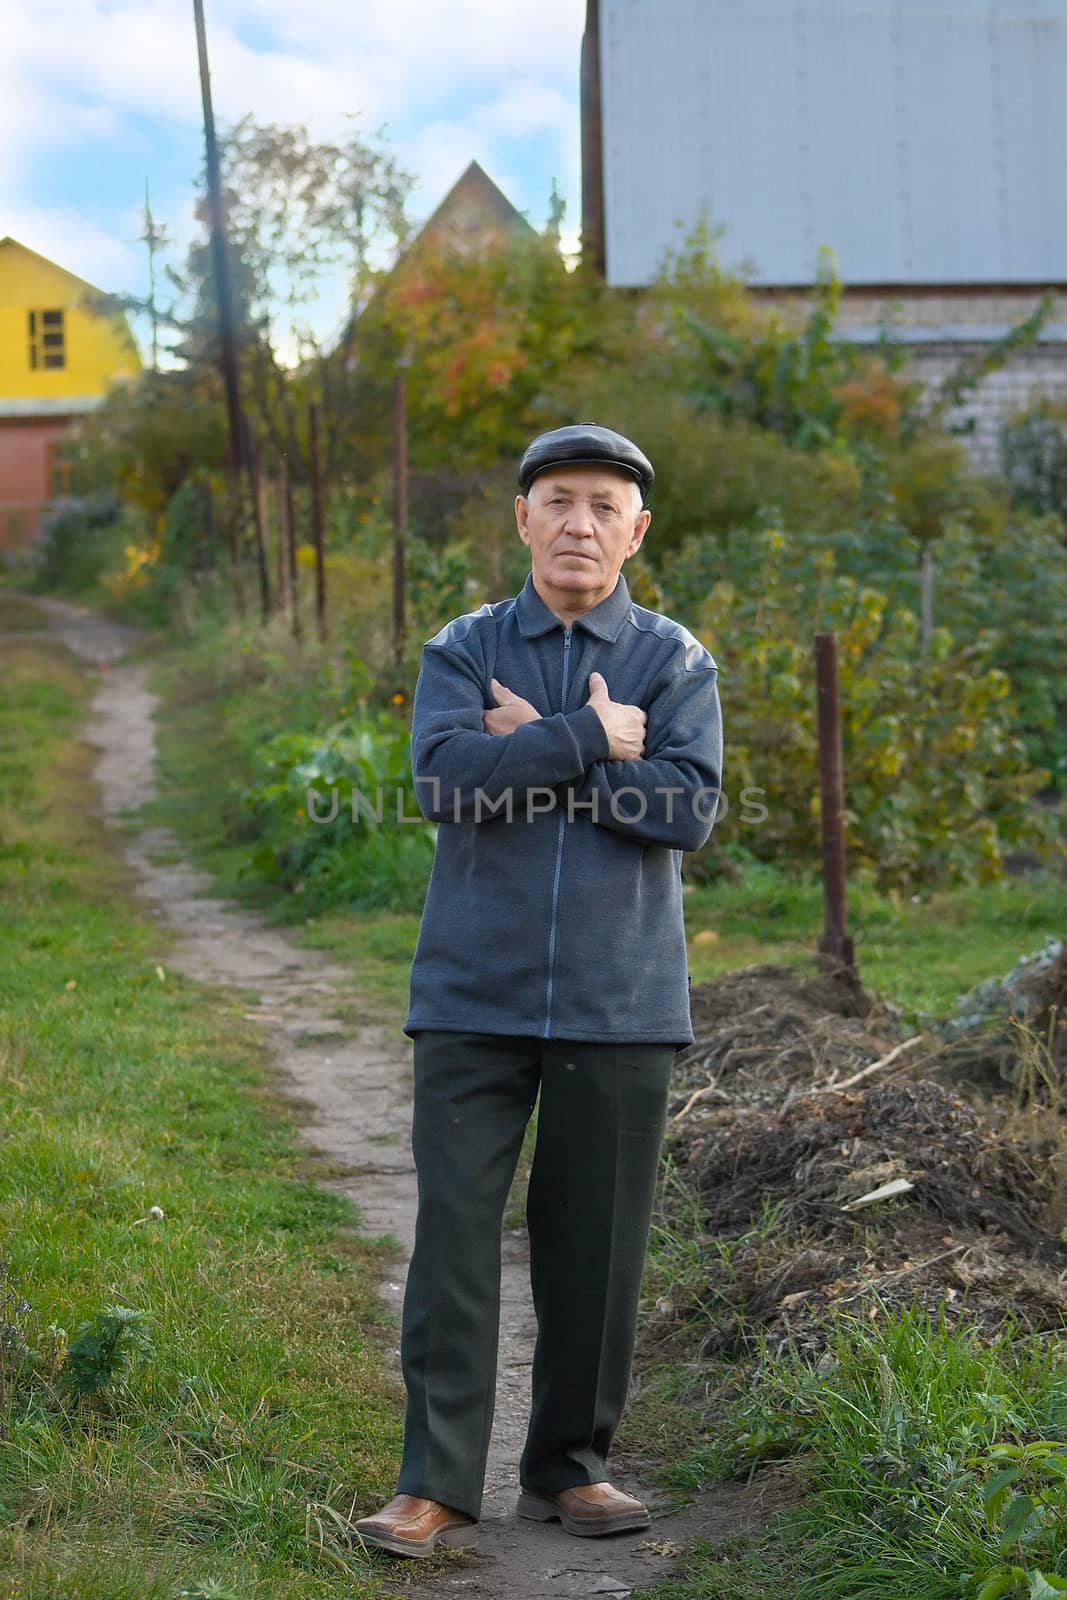 the elderly man in a cap against the nature